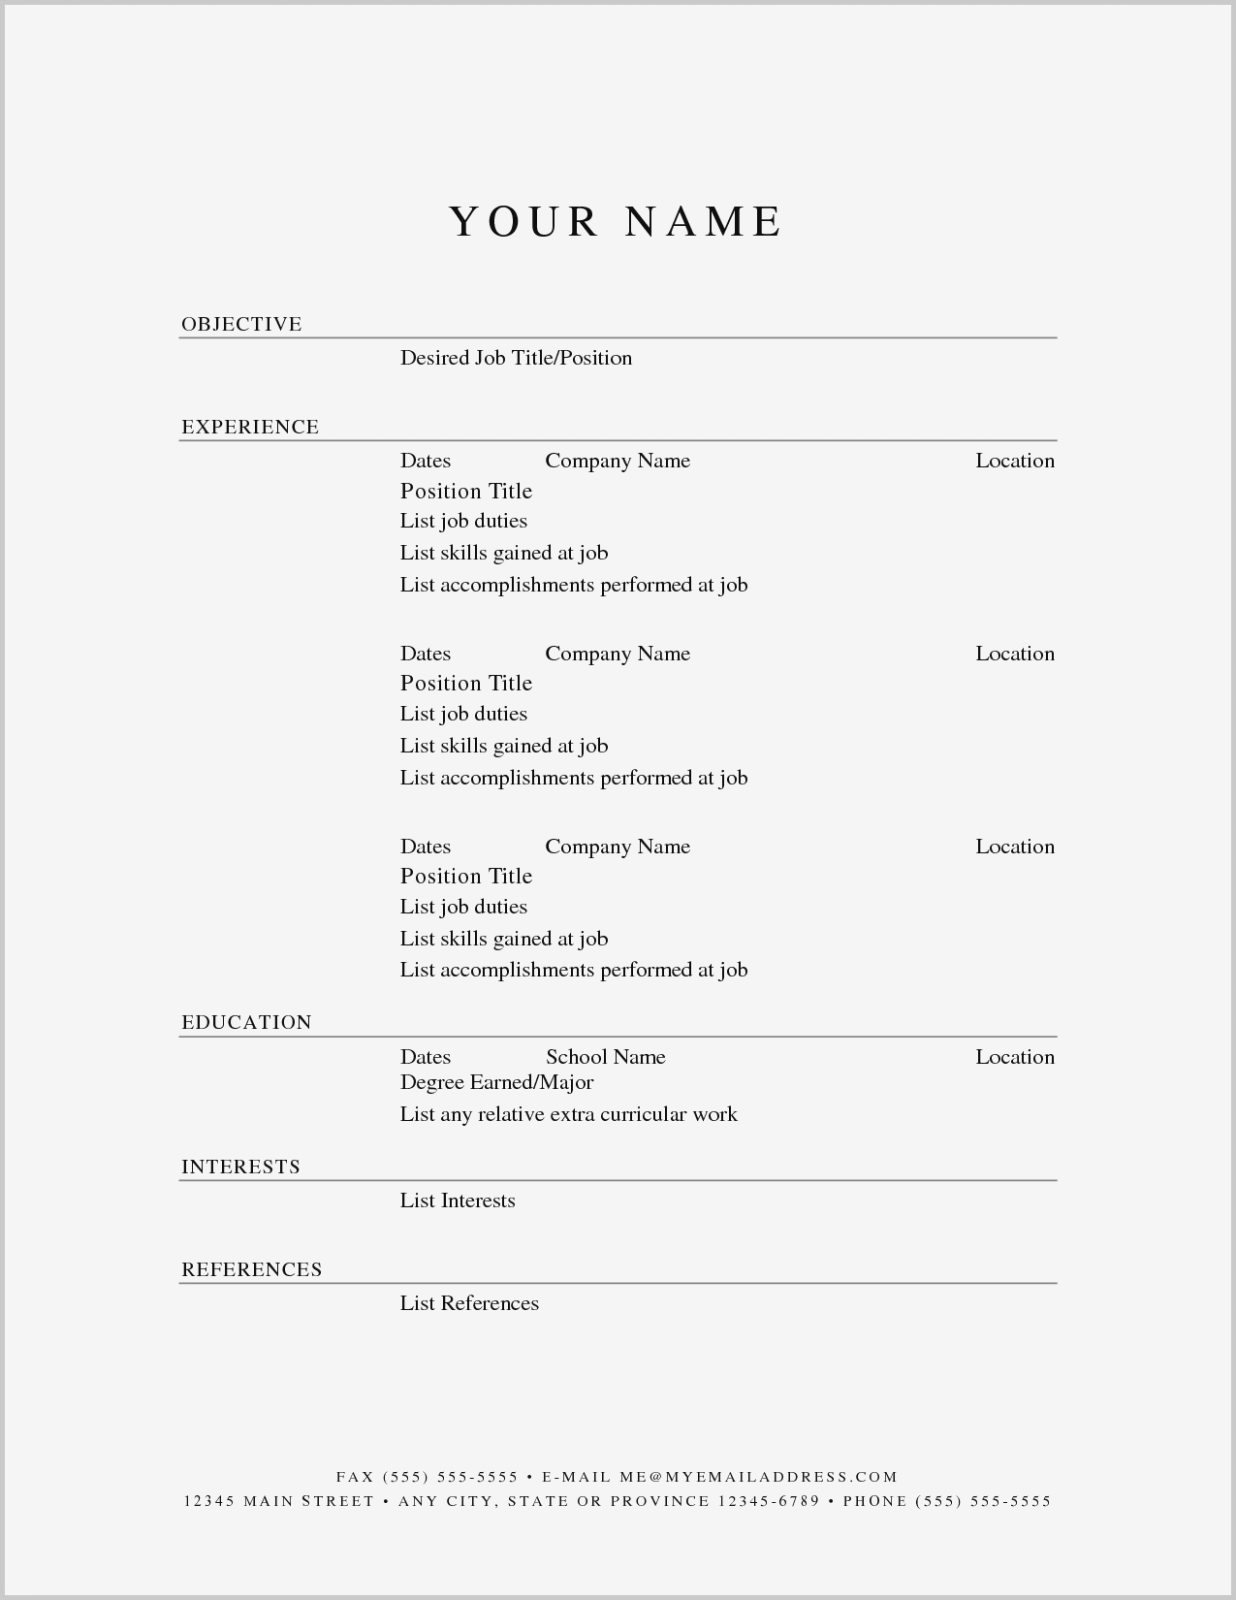 absolutely-free-resume-builder-2019-2020-resume-templates-site